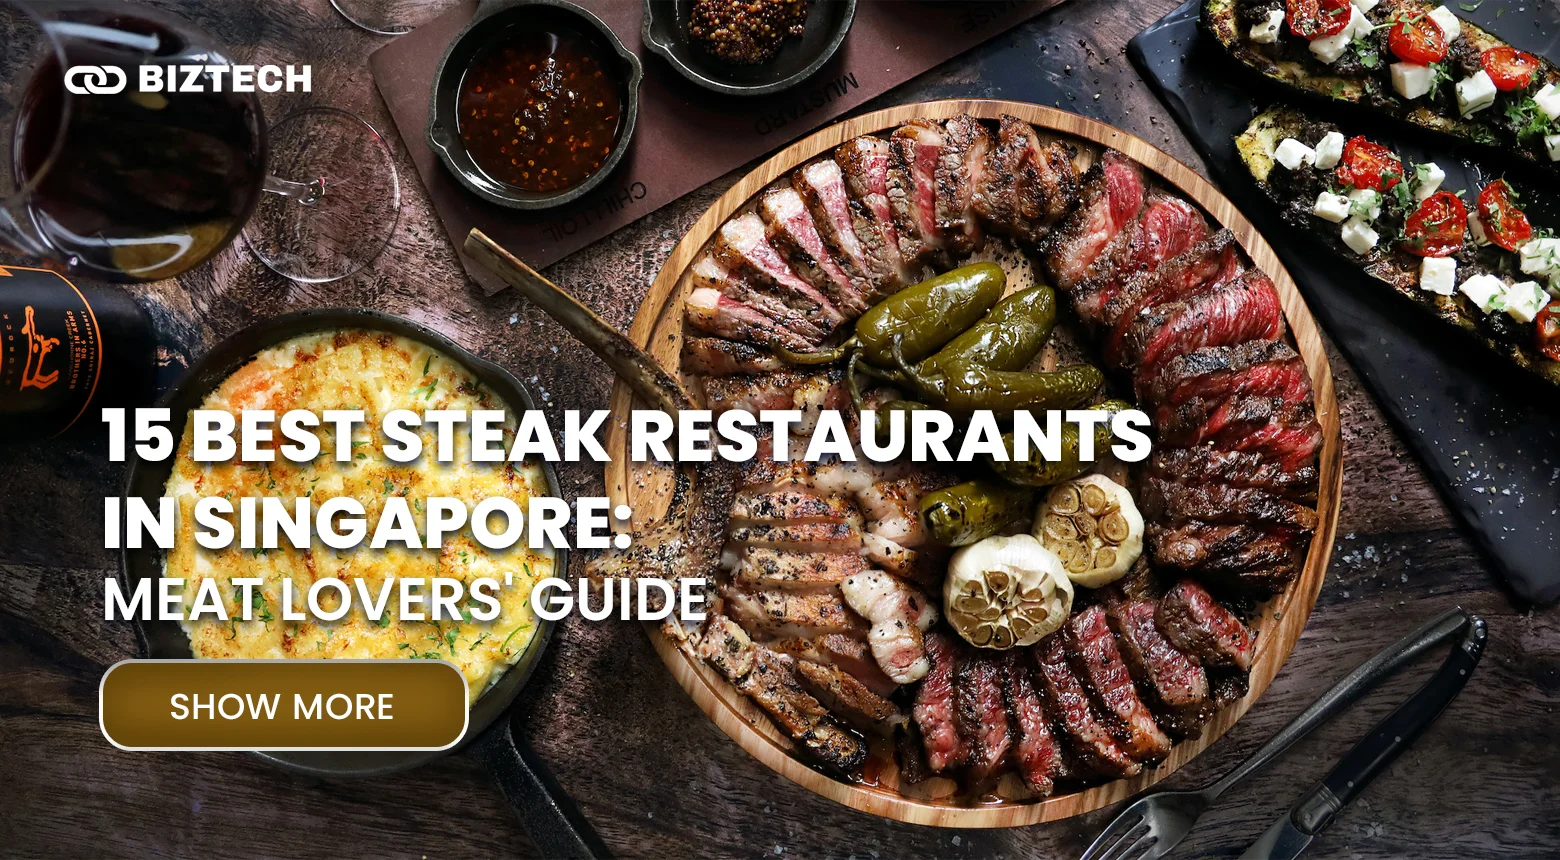 15 Restaurants to Visit for The Best Steak in Singapore: Meat Lovers’ Guide